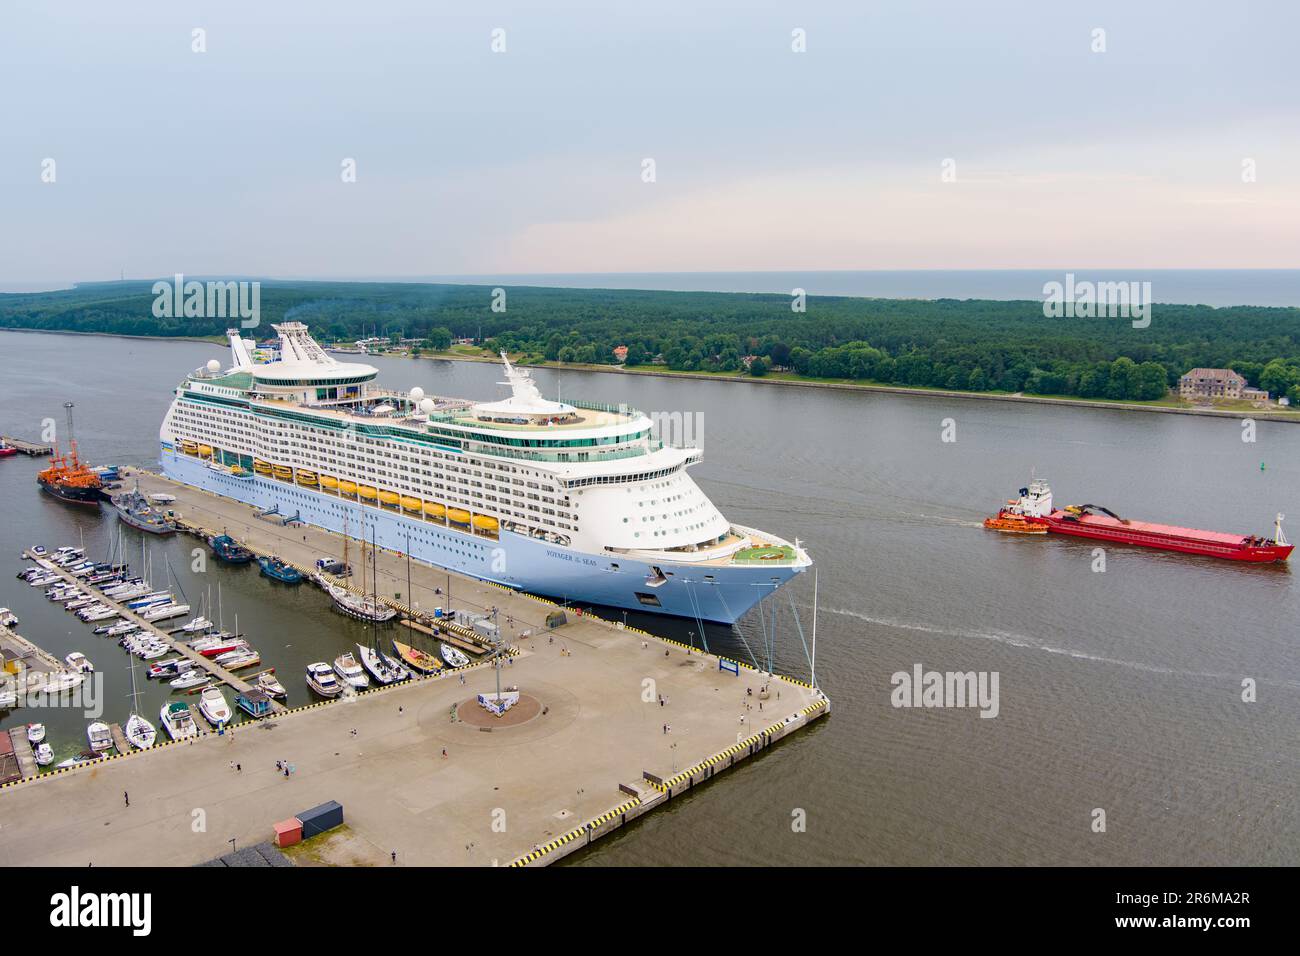 KLAIPEDA, LITHUANIA - JUNE 2022: Aerial view of huge 'Voyager of the Seas' cruise liner in the port of Klaipeda. Klaipeda cruise ship terminal, touris Stock Photo